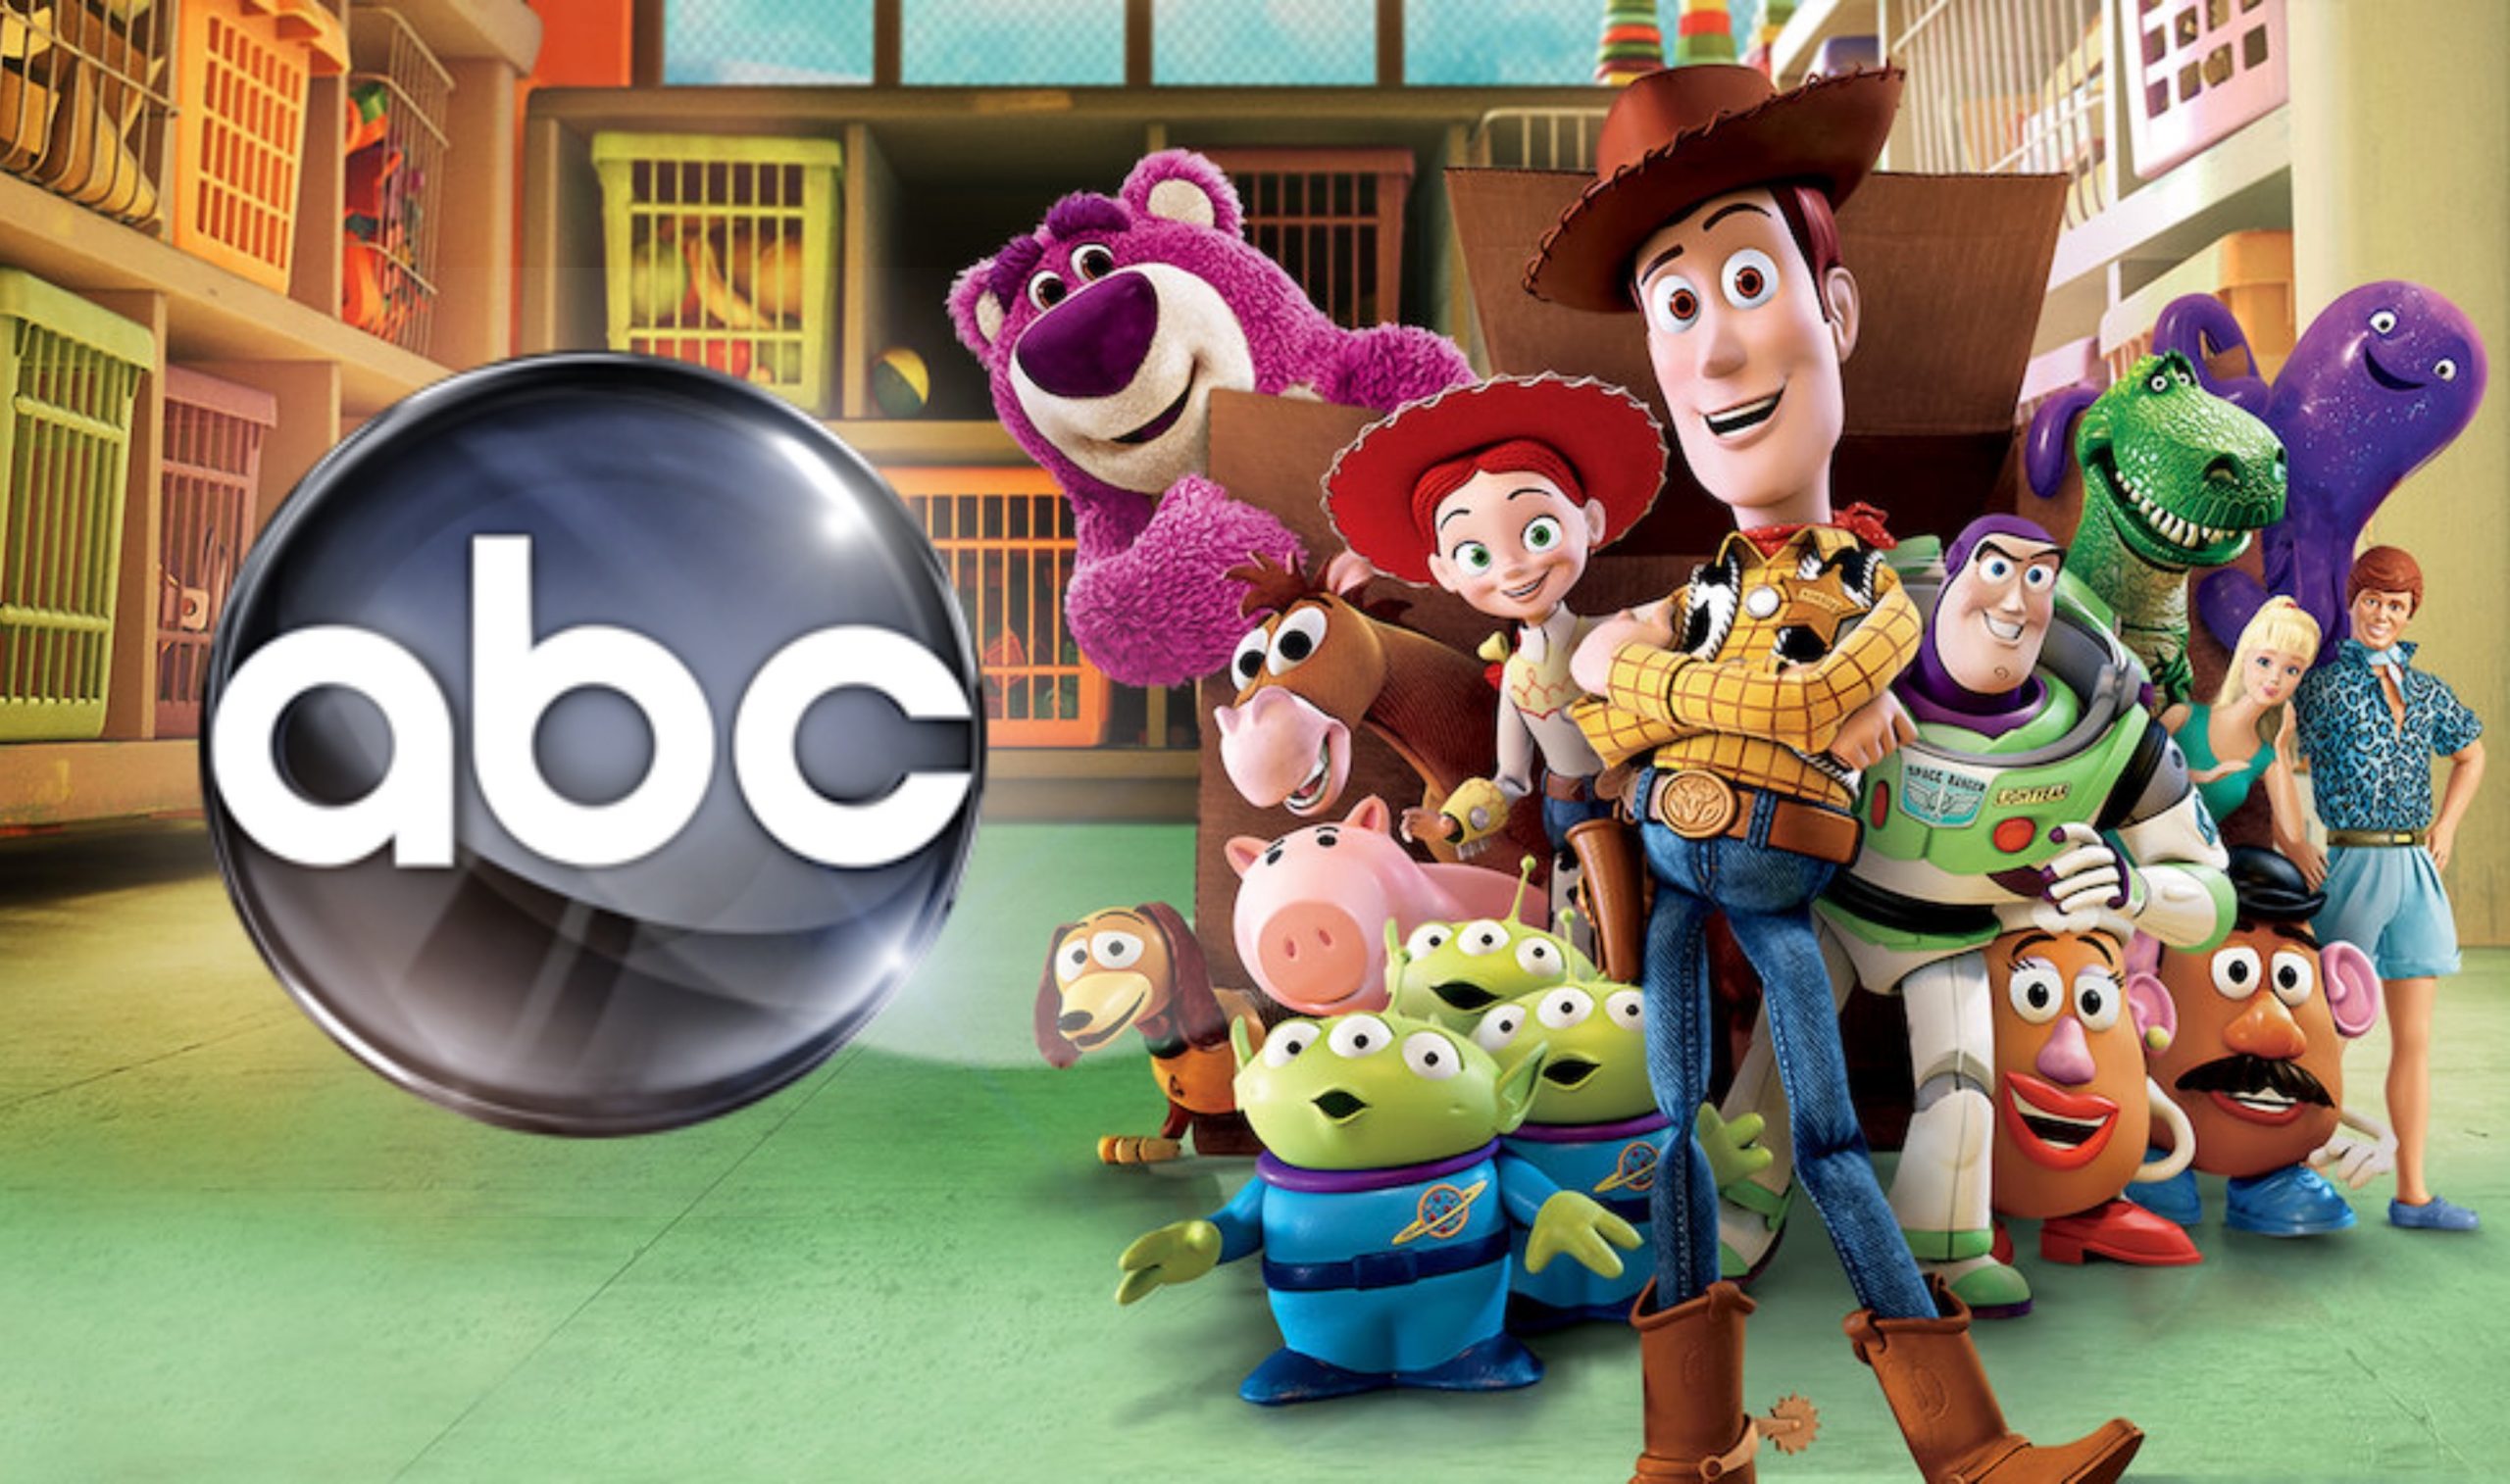 ABC’s ‘The Wonderful World of Disney’ to Continue with ‘Toy Story 3’